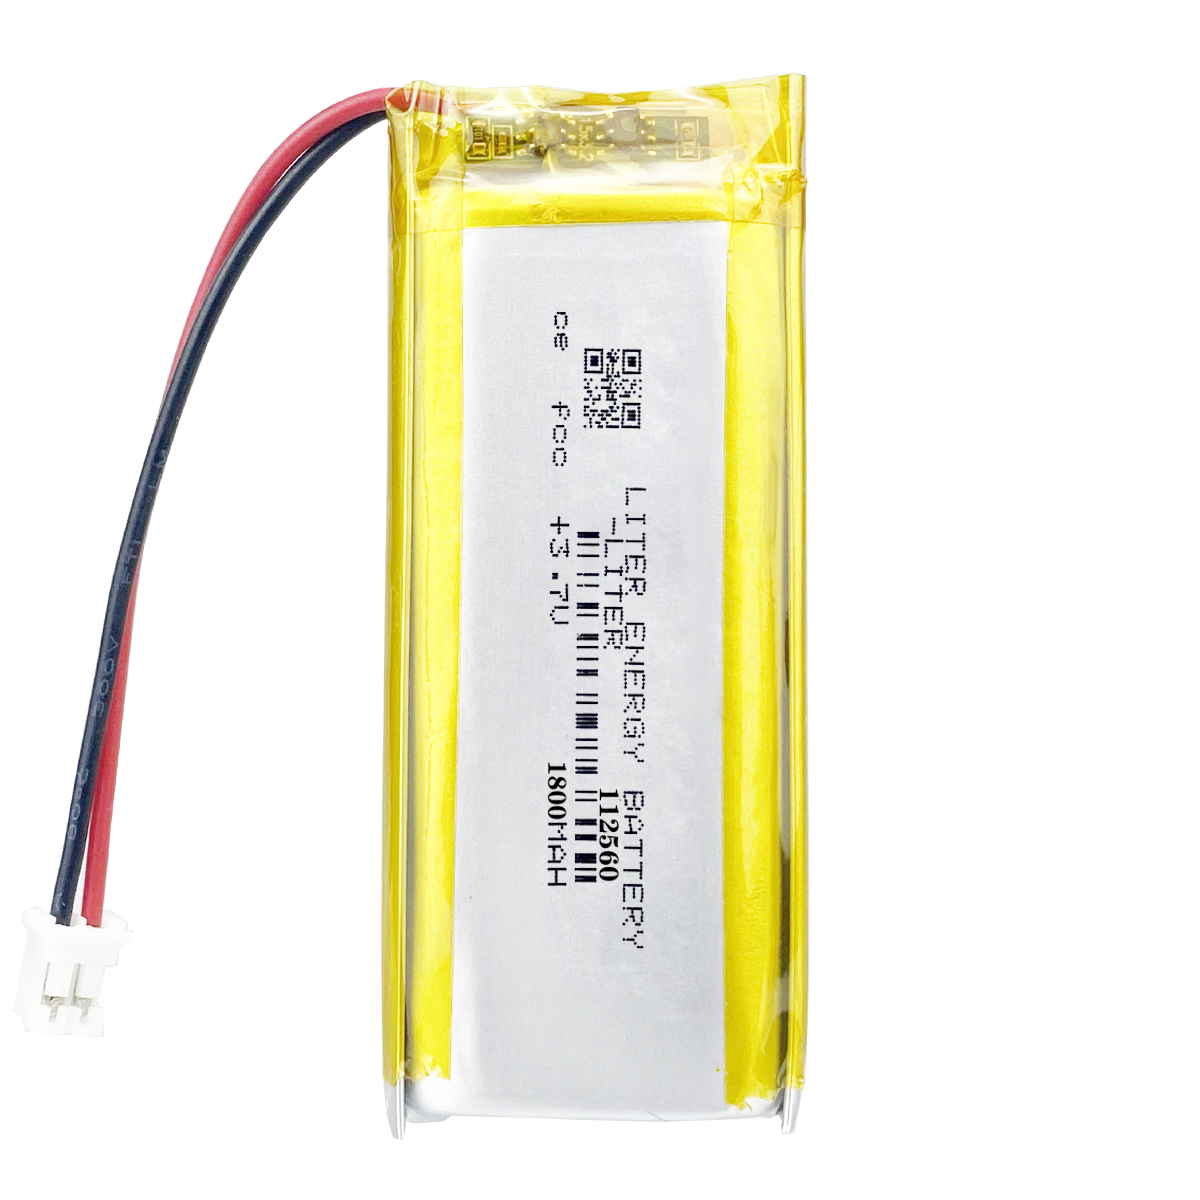 3.7V Hot Selling Multipurpose Rechargeable LiPo Batteries With Molex 87439-0400 112560 1800mAh 6.66Wh